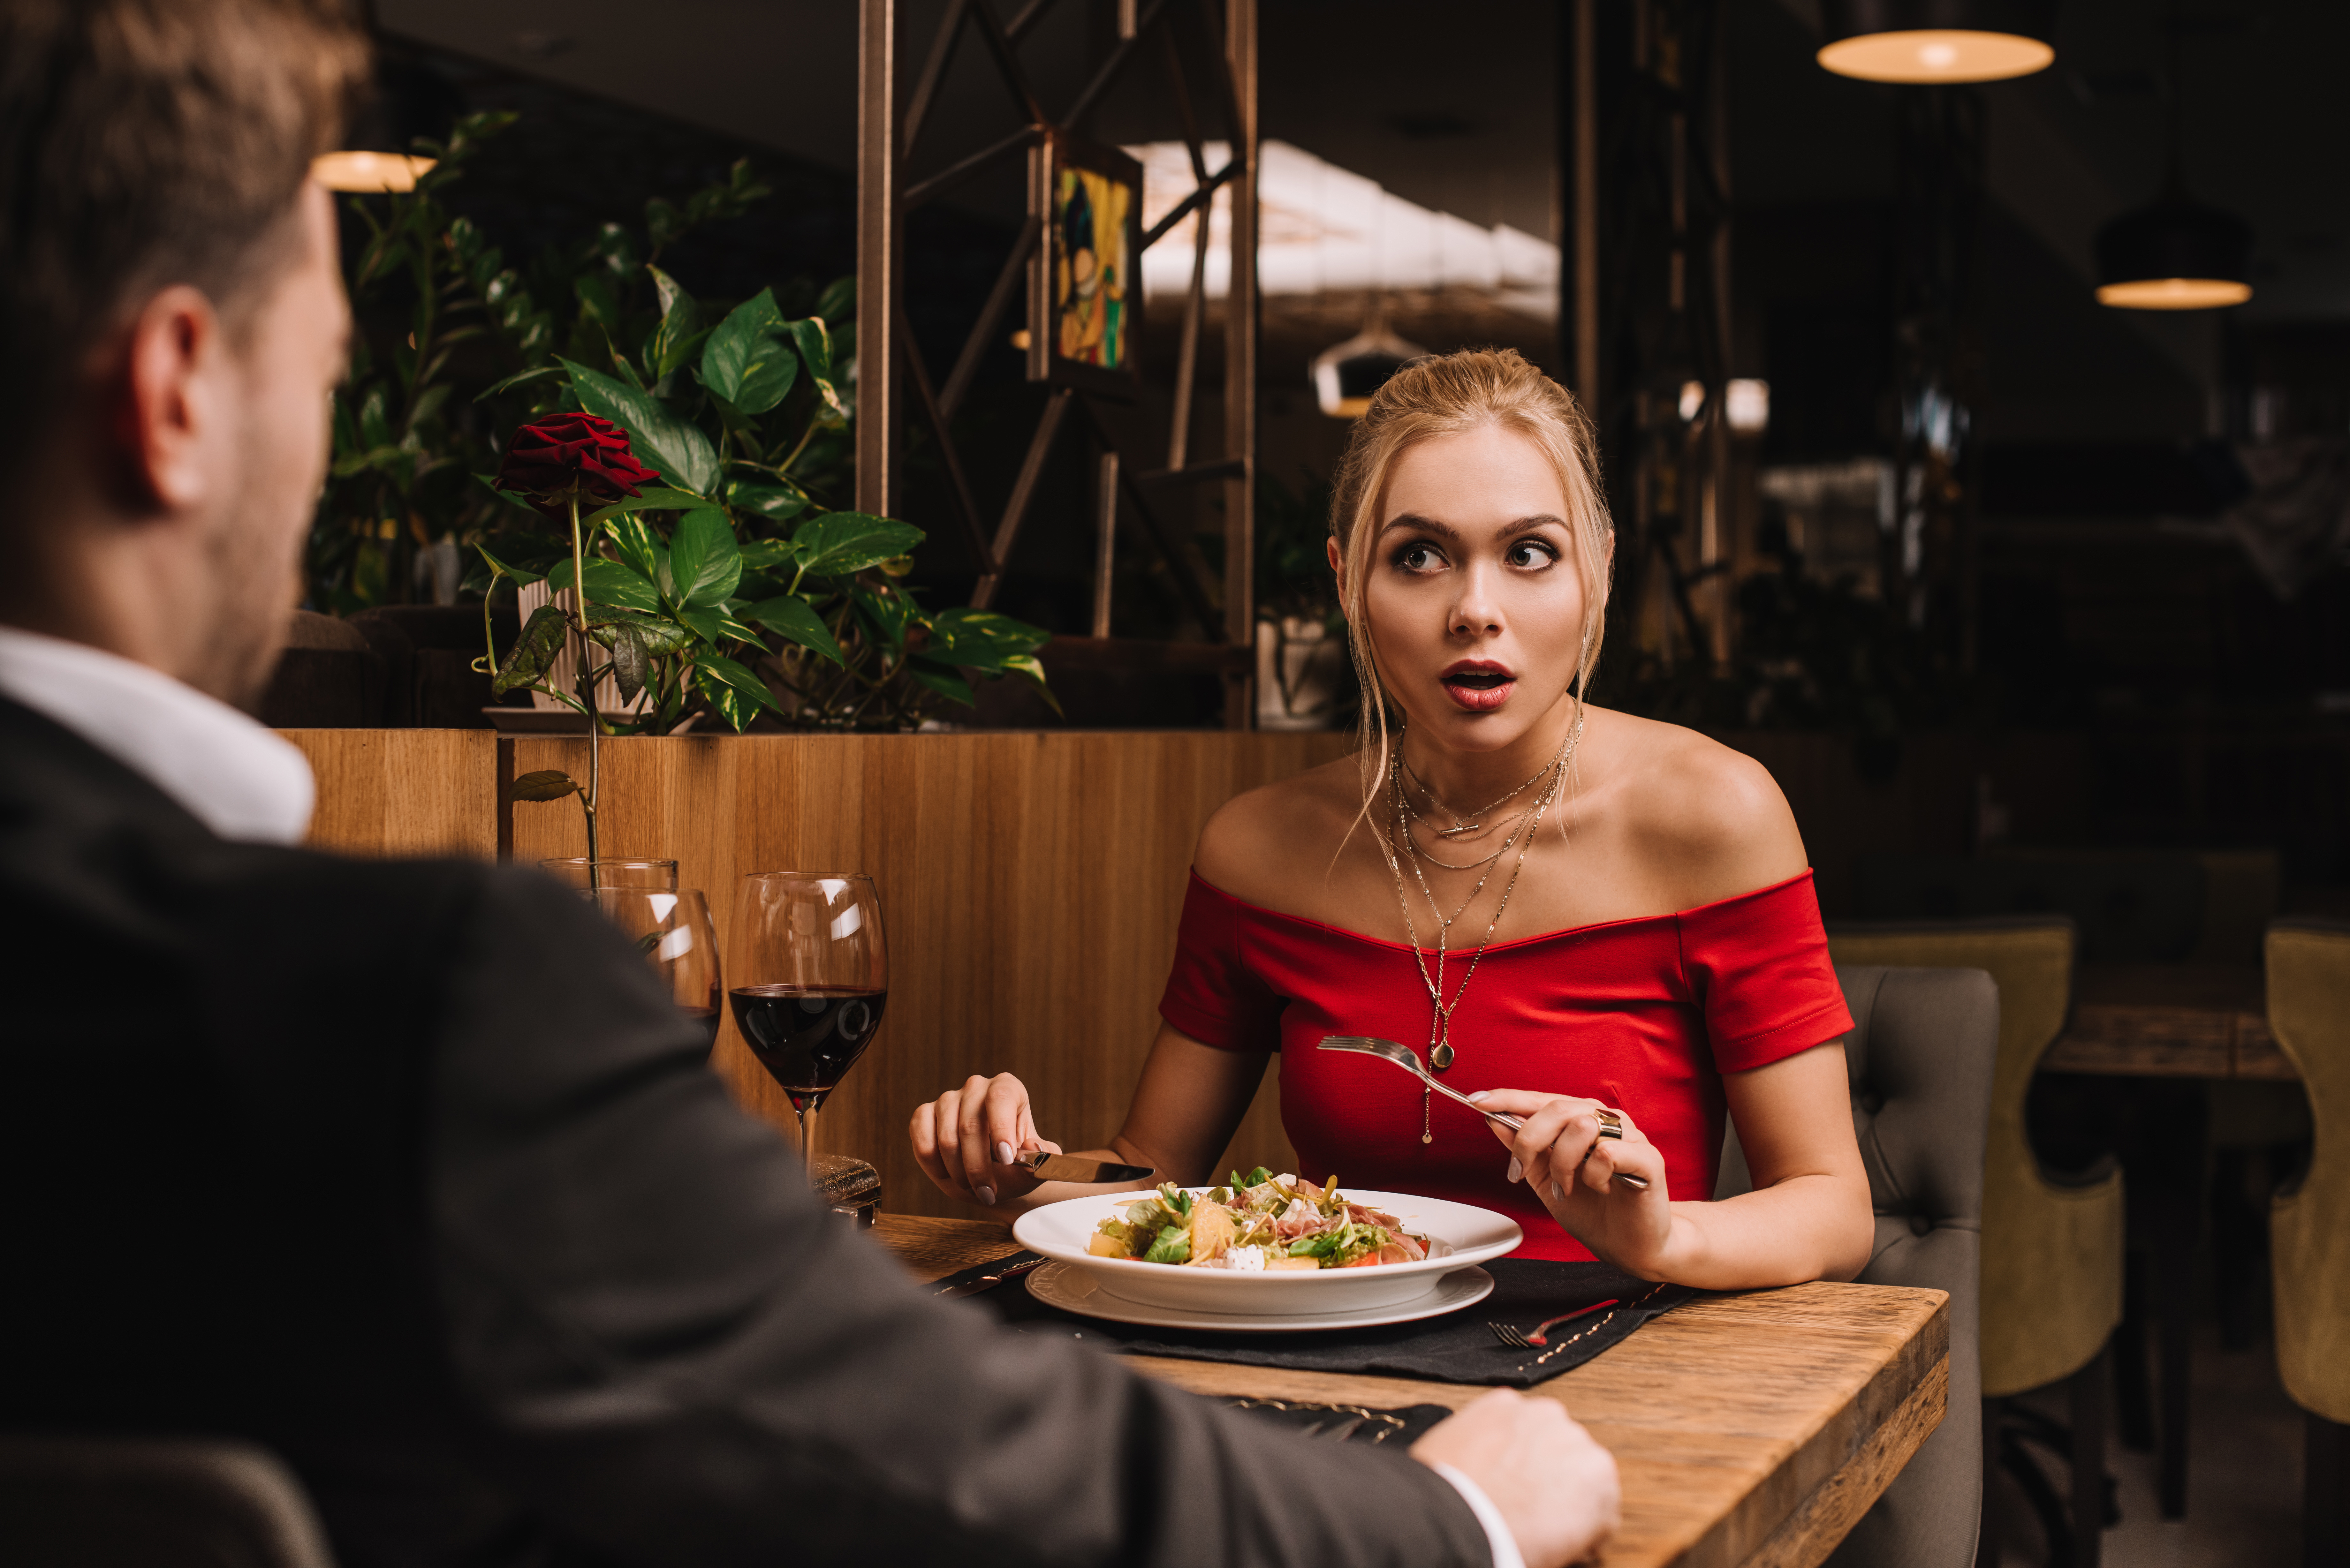 A young woman looks at the man in shock during dinner | Source: Shutterstock